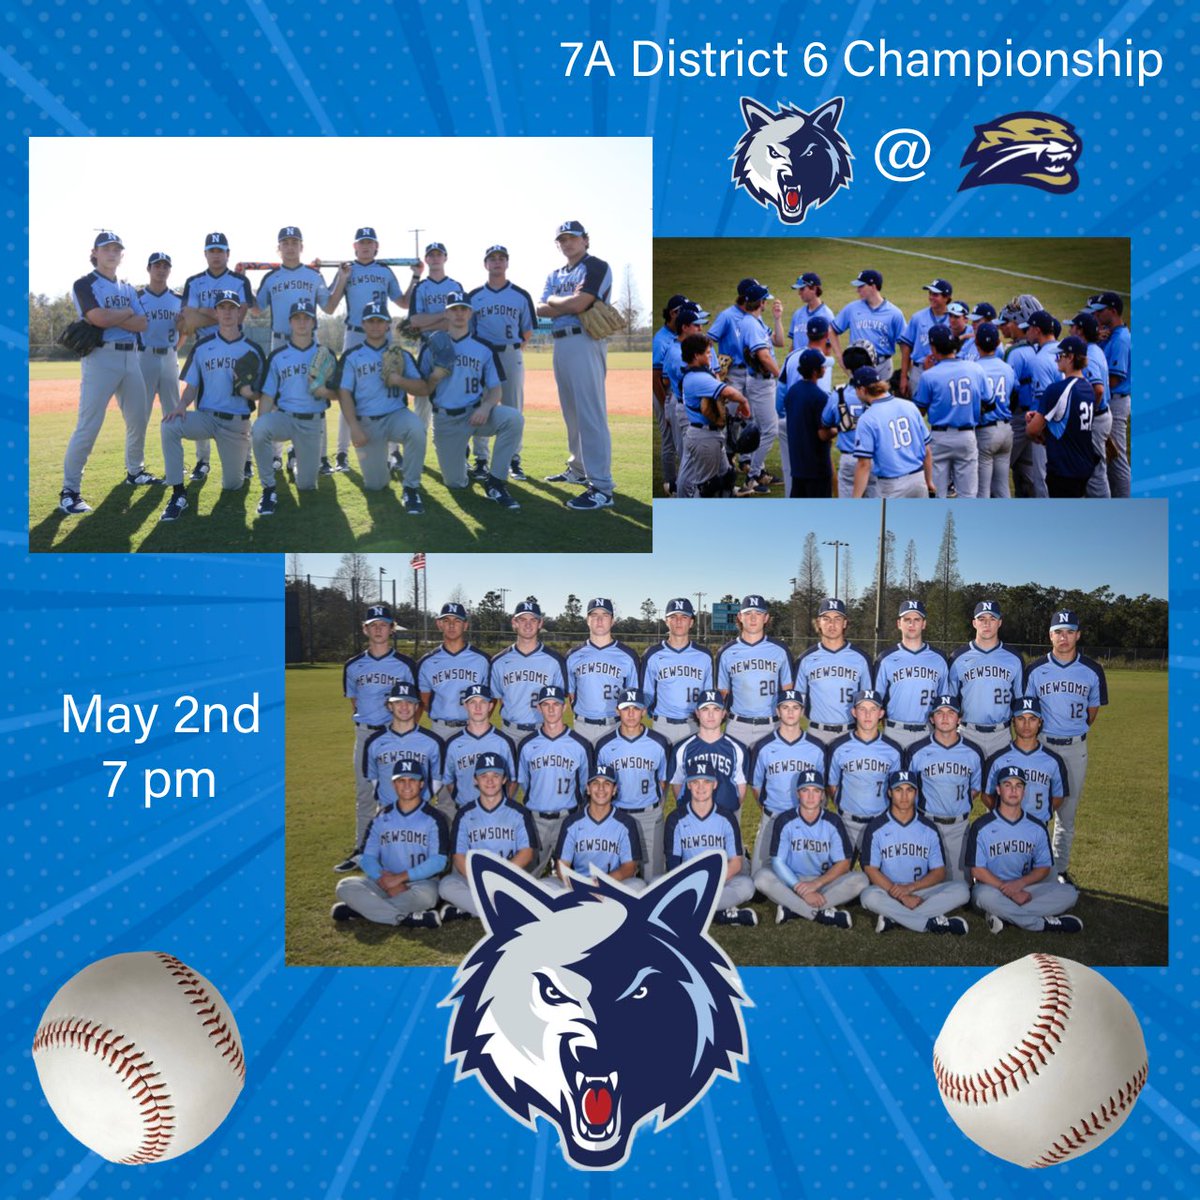 Today is the calm before the storm. After dispatching the Winterhaven Blue Devils in the district semifinals, the Wolves will face the Cougars in a rematch of last year’s district final. The stakes are high with a birth in regionals on the line.